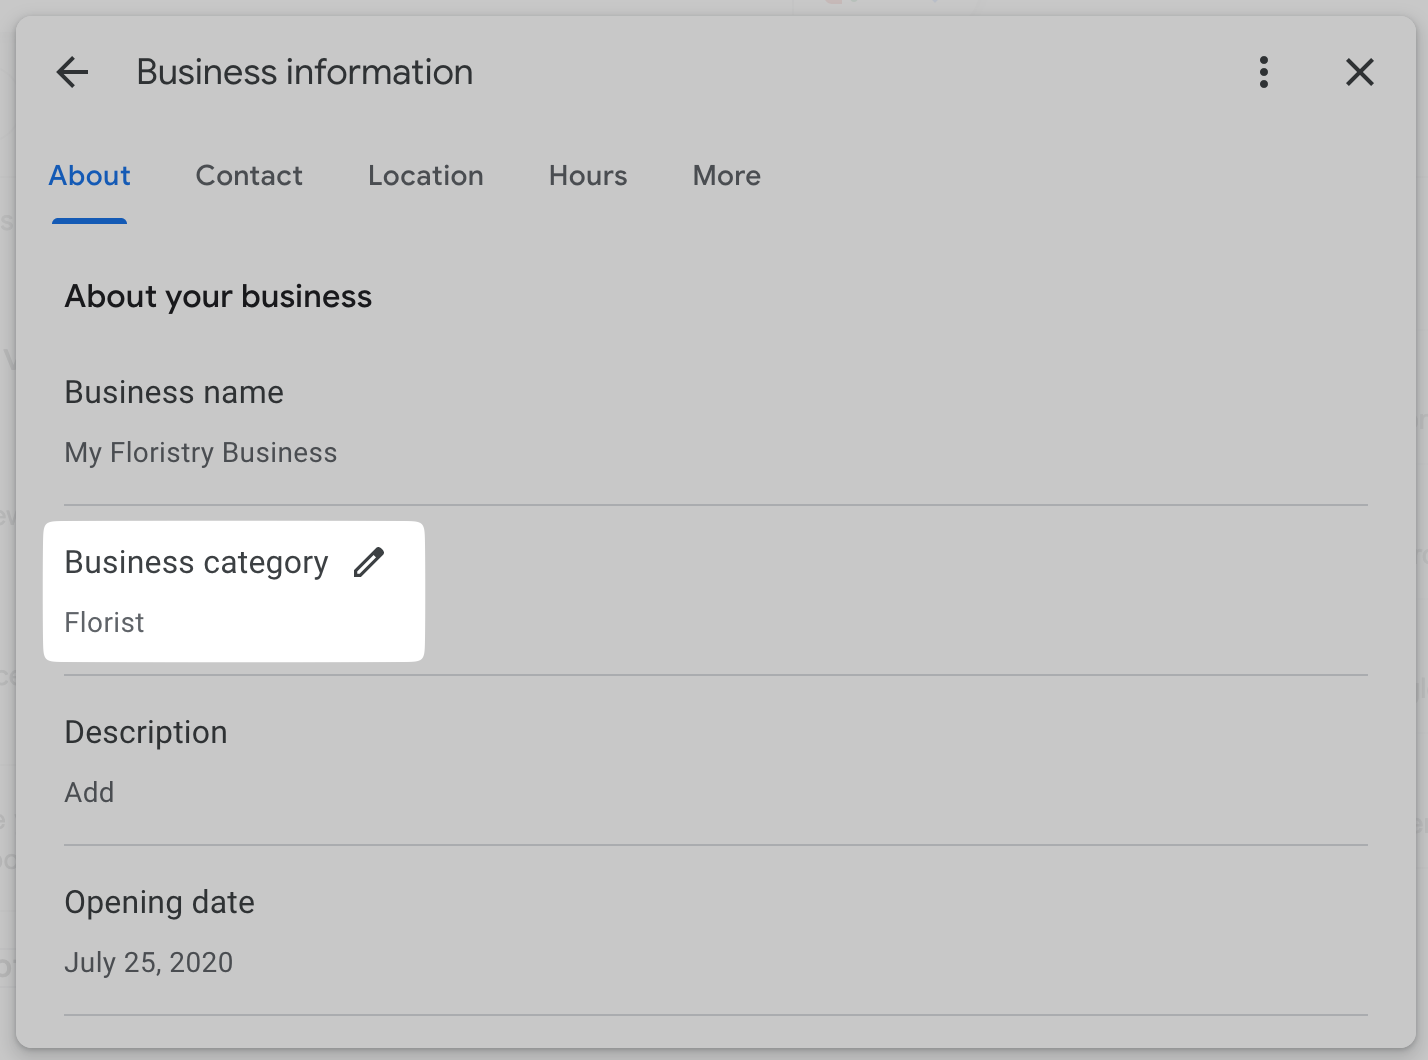 Business category field highlighted on "Business information" page